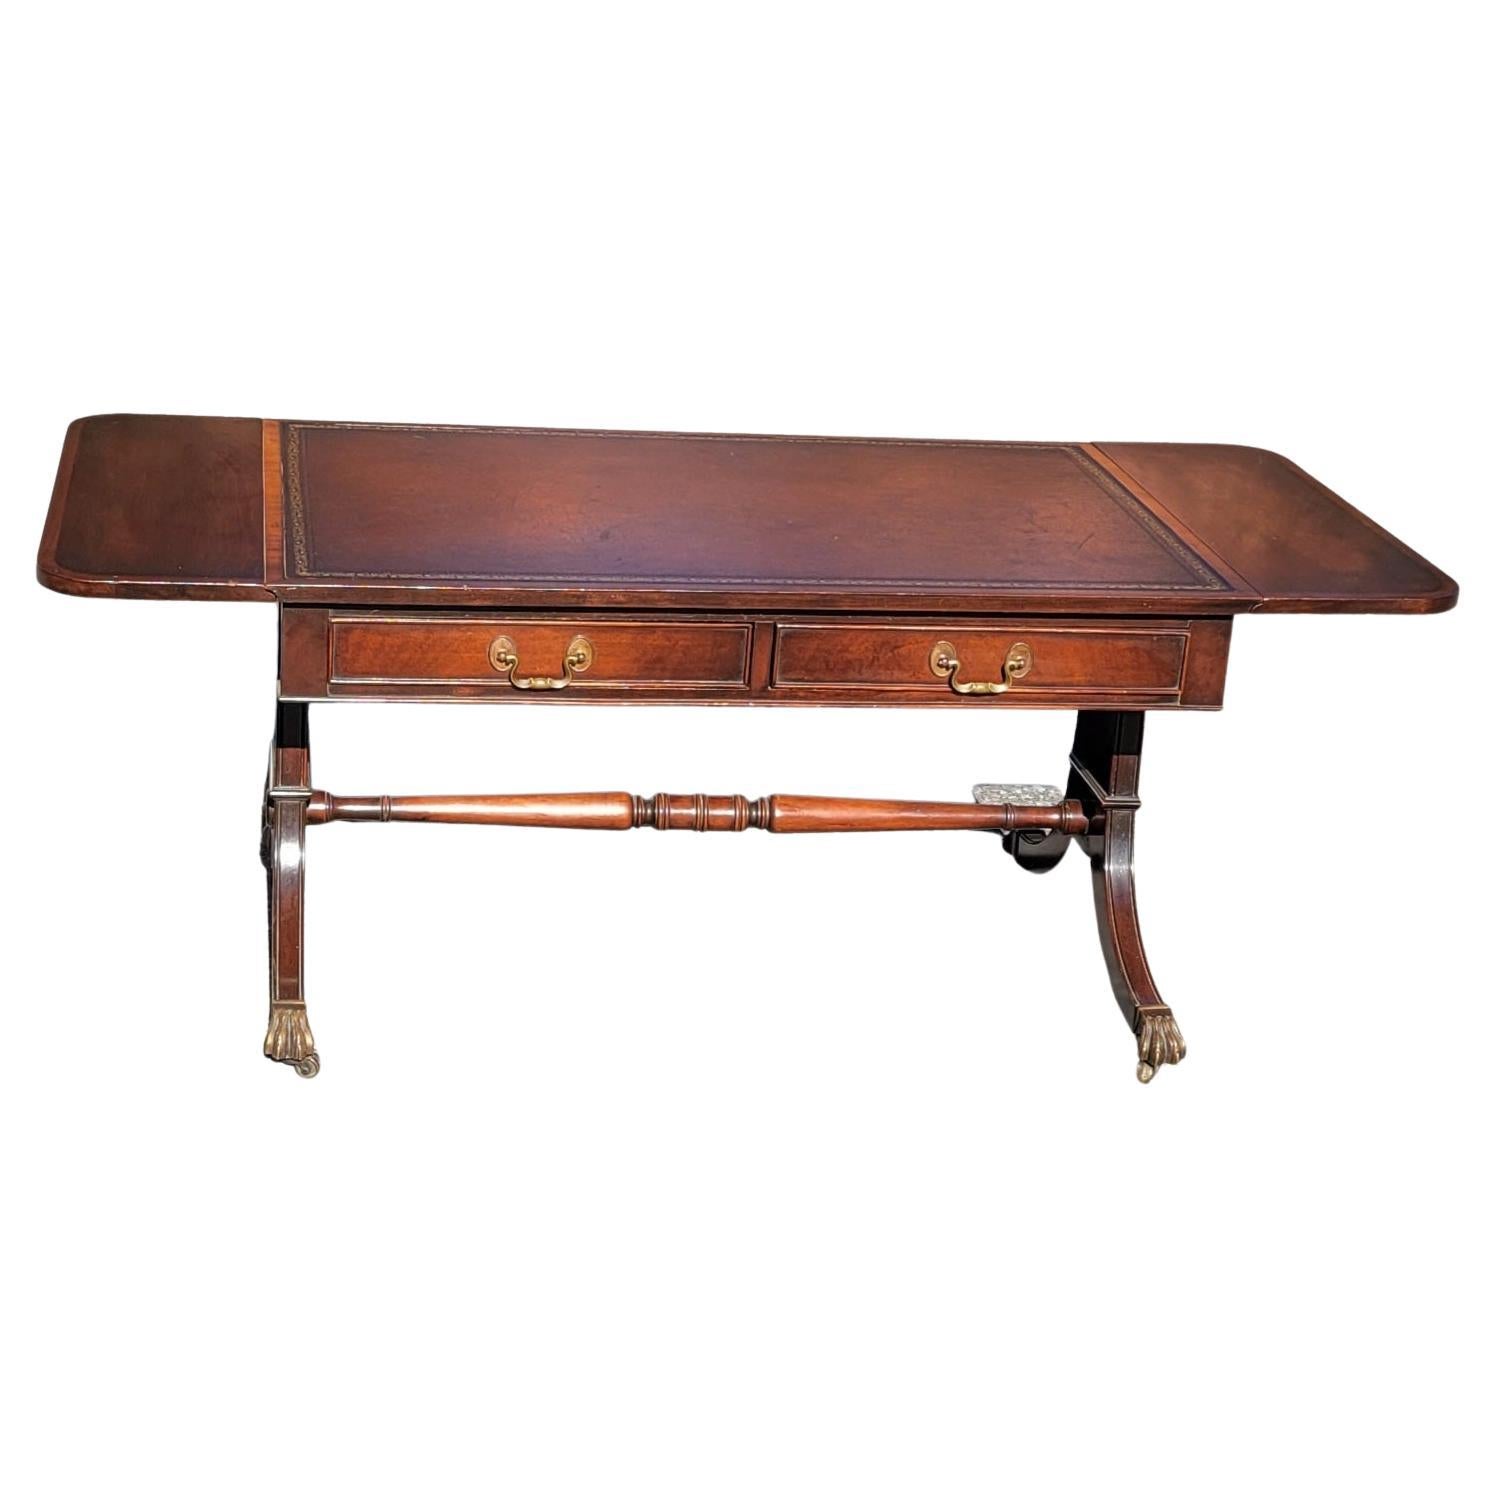 George III Style Mahogany and Leather Top Inset Drop Leaf Coffee Table on Wheels 5